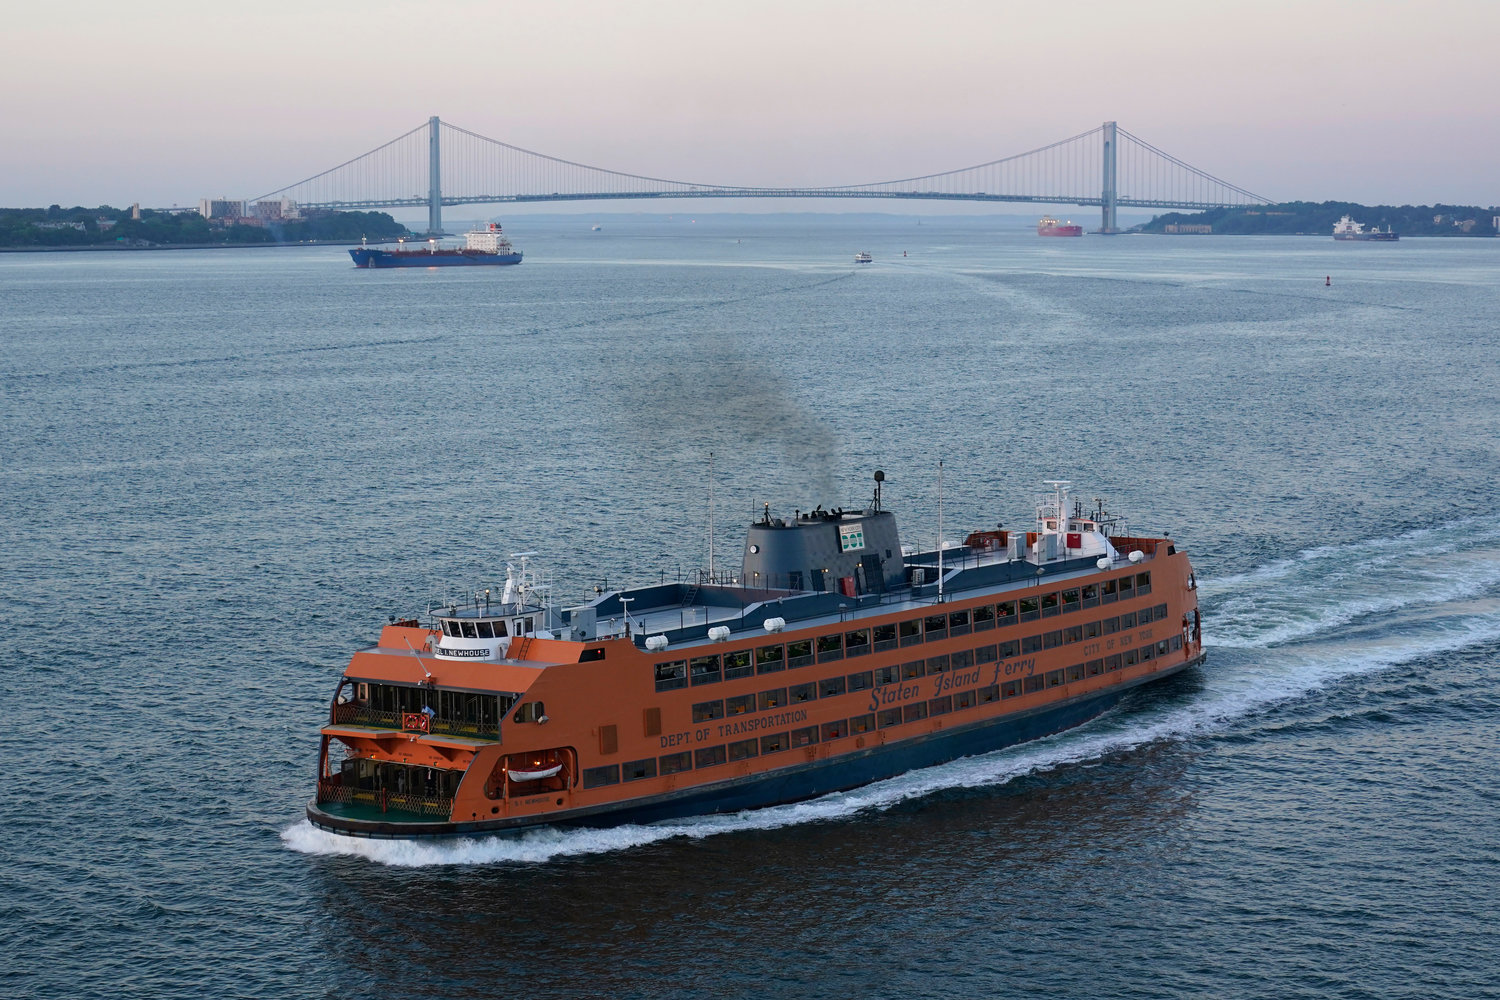 A Staten Island Ferry made the  5.2-mile trip across Upper New York Bay.